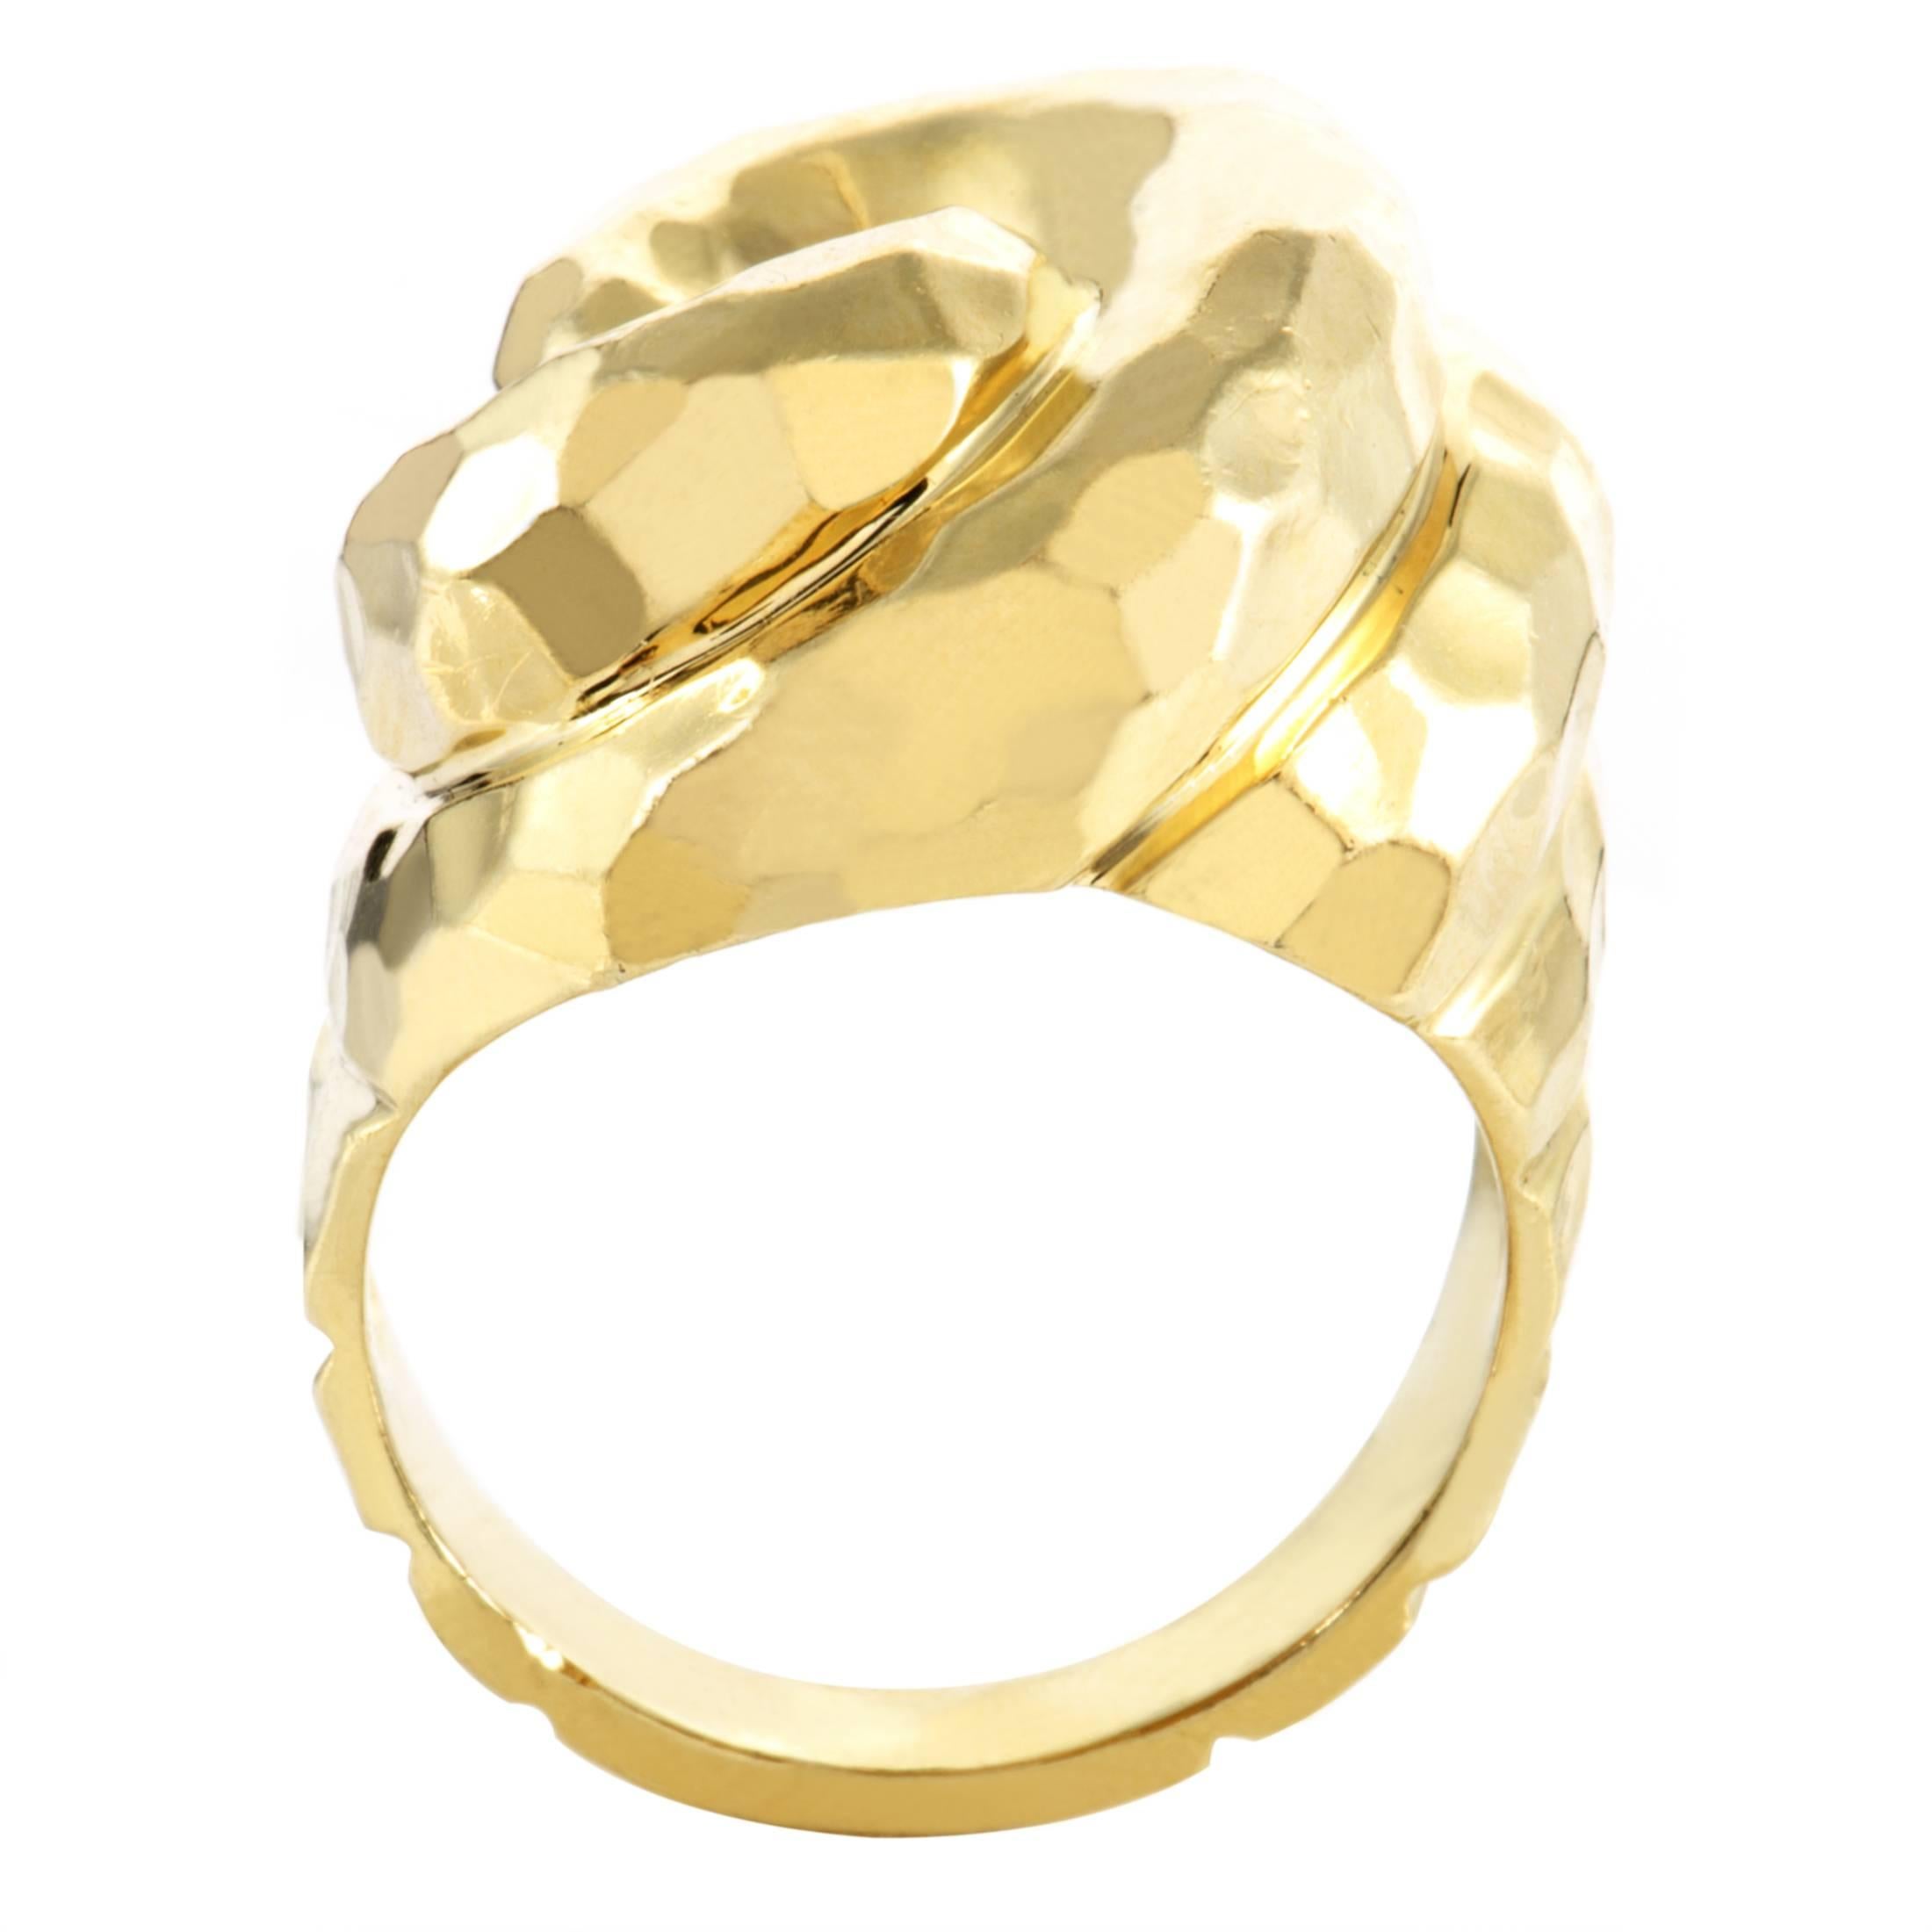 Focusing on bringing out the intrinsic radiant allure of 18K yellow gold through designing a spellbinding spiraling shape and applying a mesmerizing faceted finish, Henry Dunay present this magnificent and luxurious ring.
Ring Size: 9.25 (59